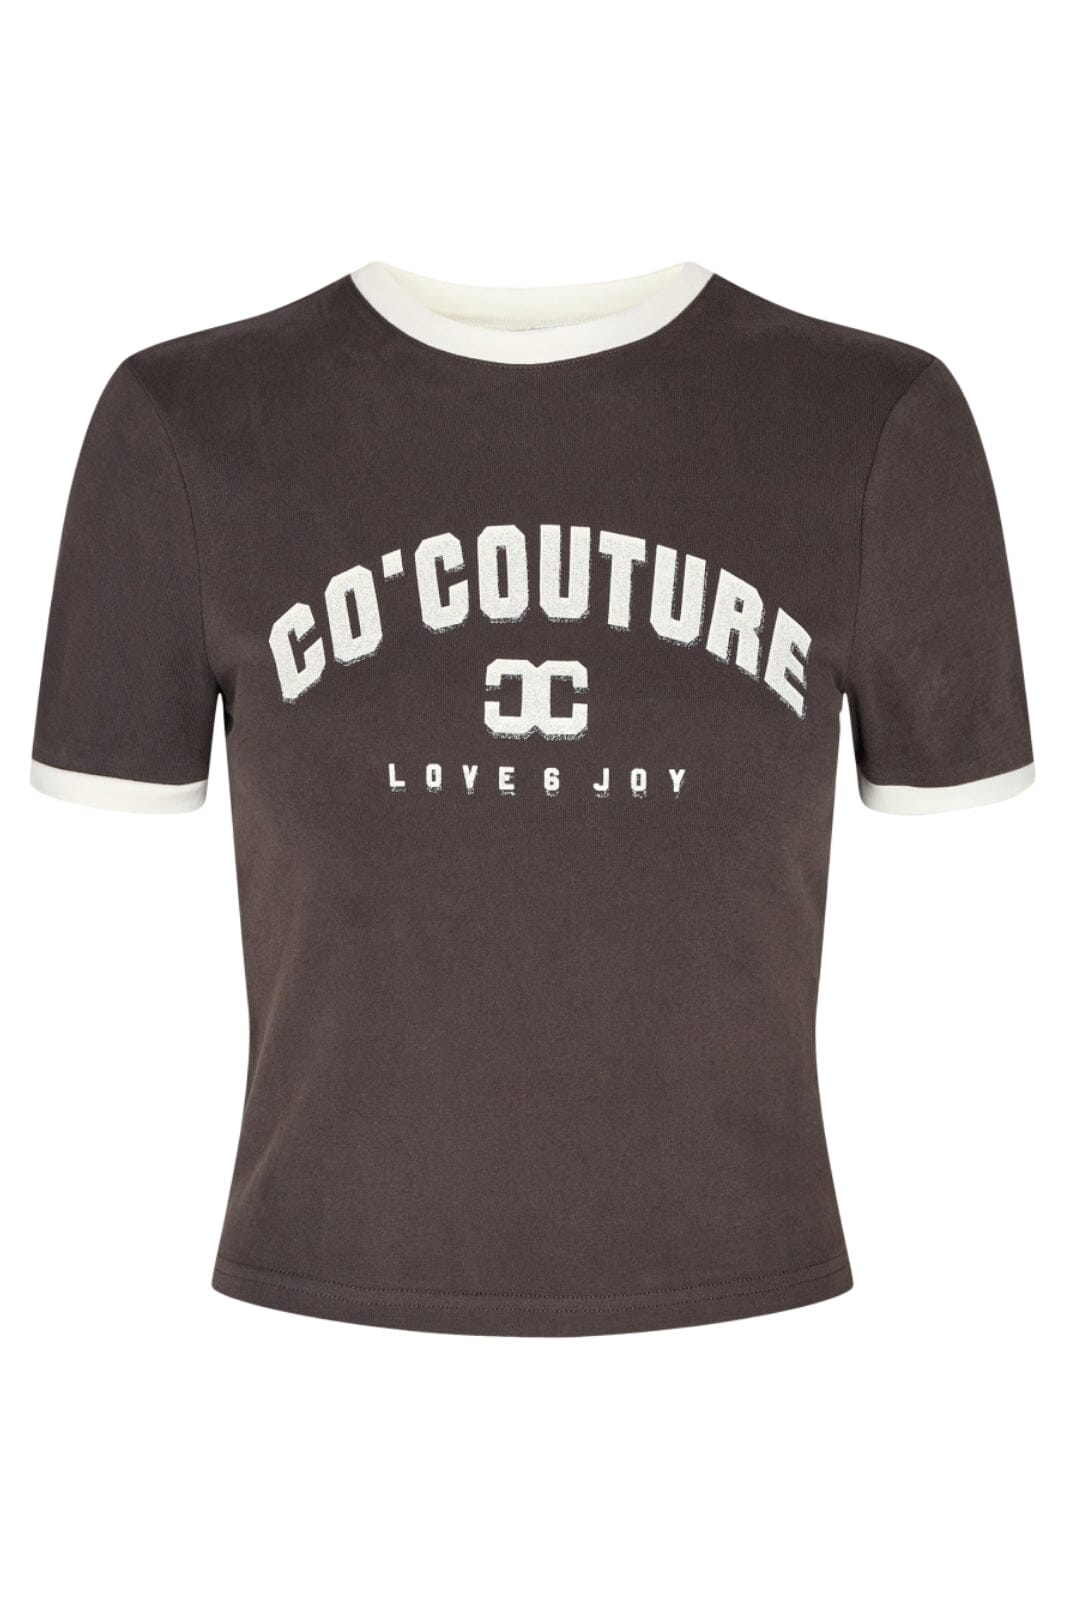 Co´couture - Edgecc Tee - 156 Antracit T-shirts 